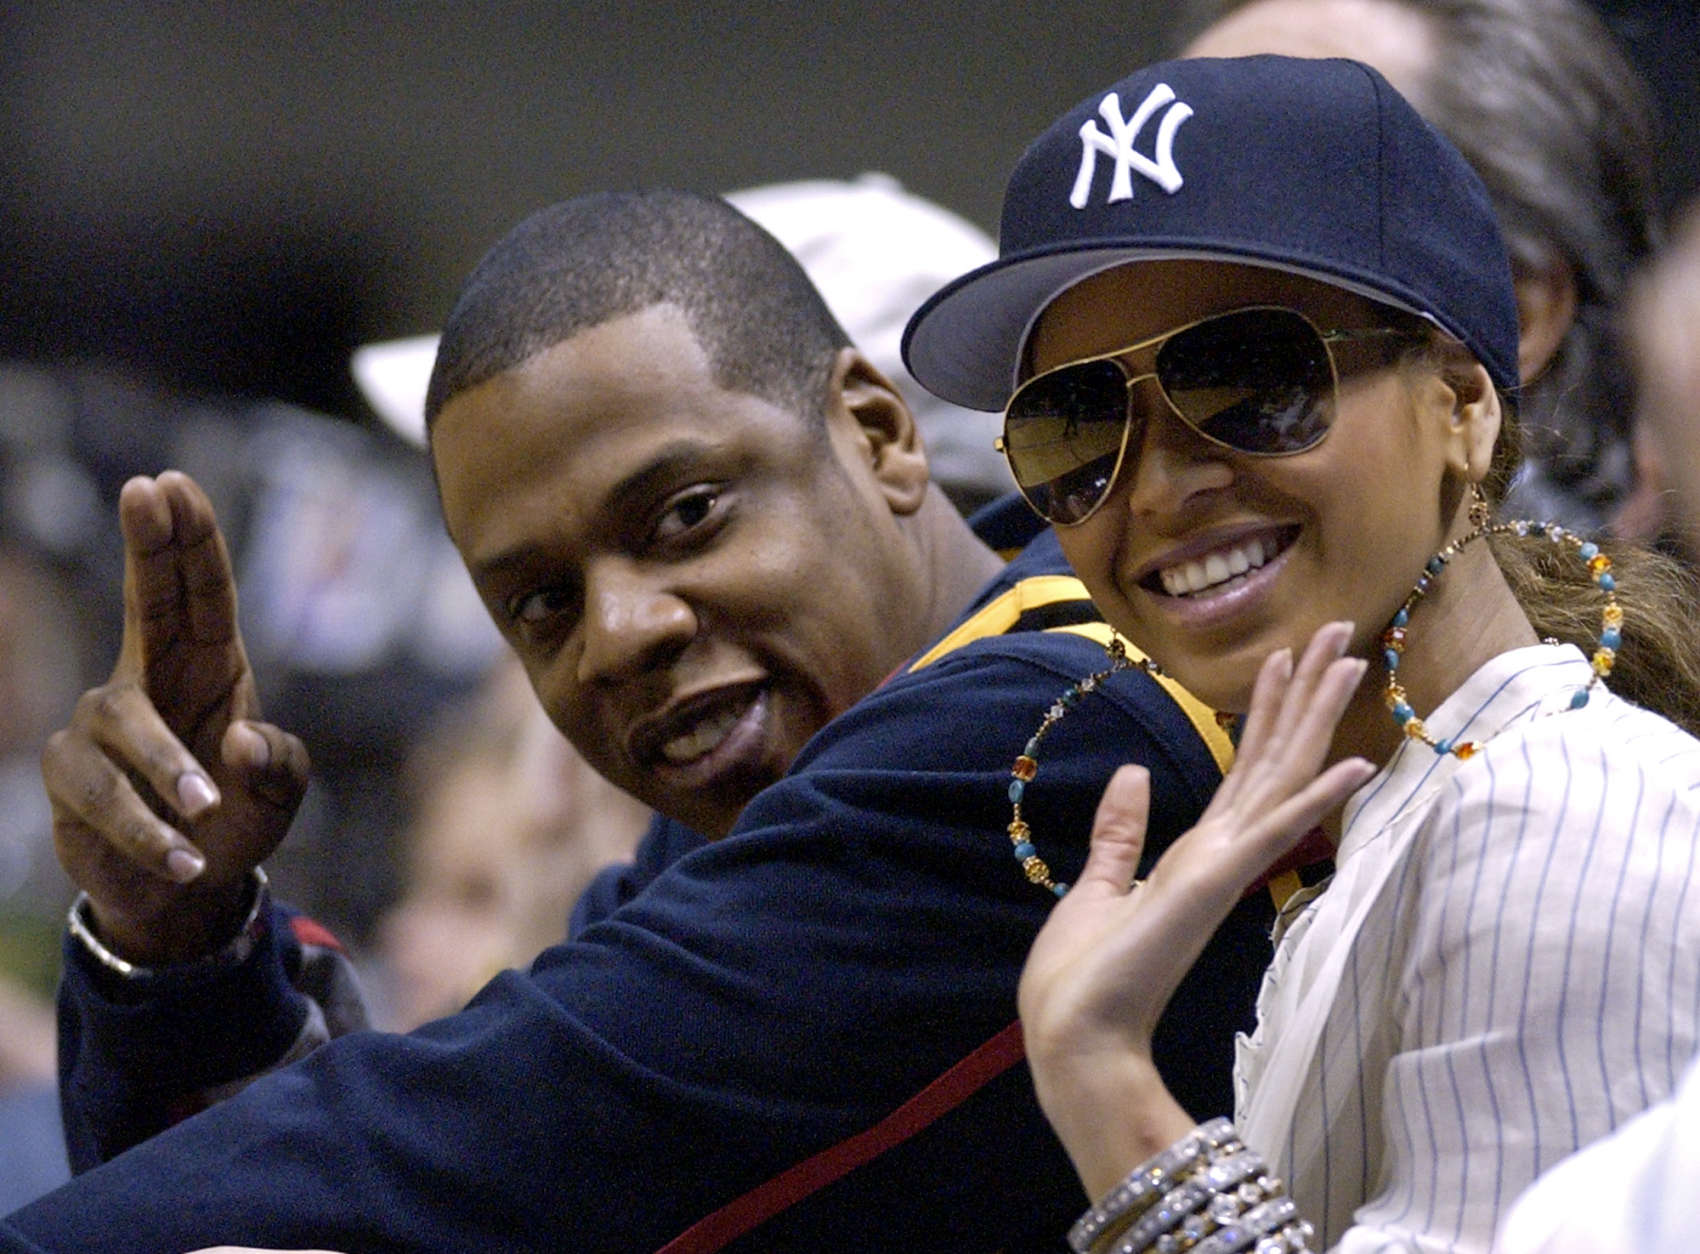 Jesse Itzler, Co-founder of Marquis Jet, and Jay-Z (R) smile and react  while the New York Yankees play the Cleveland Indians in game 4 of the ALDS  at Yankee Stadium in New